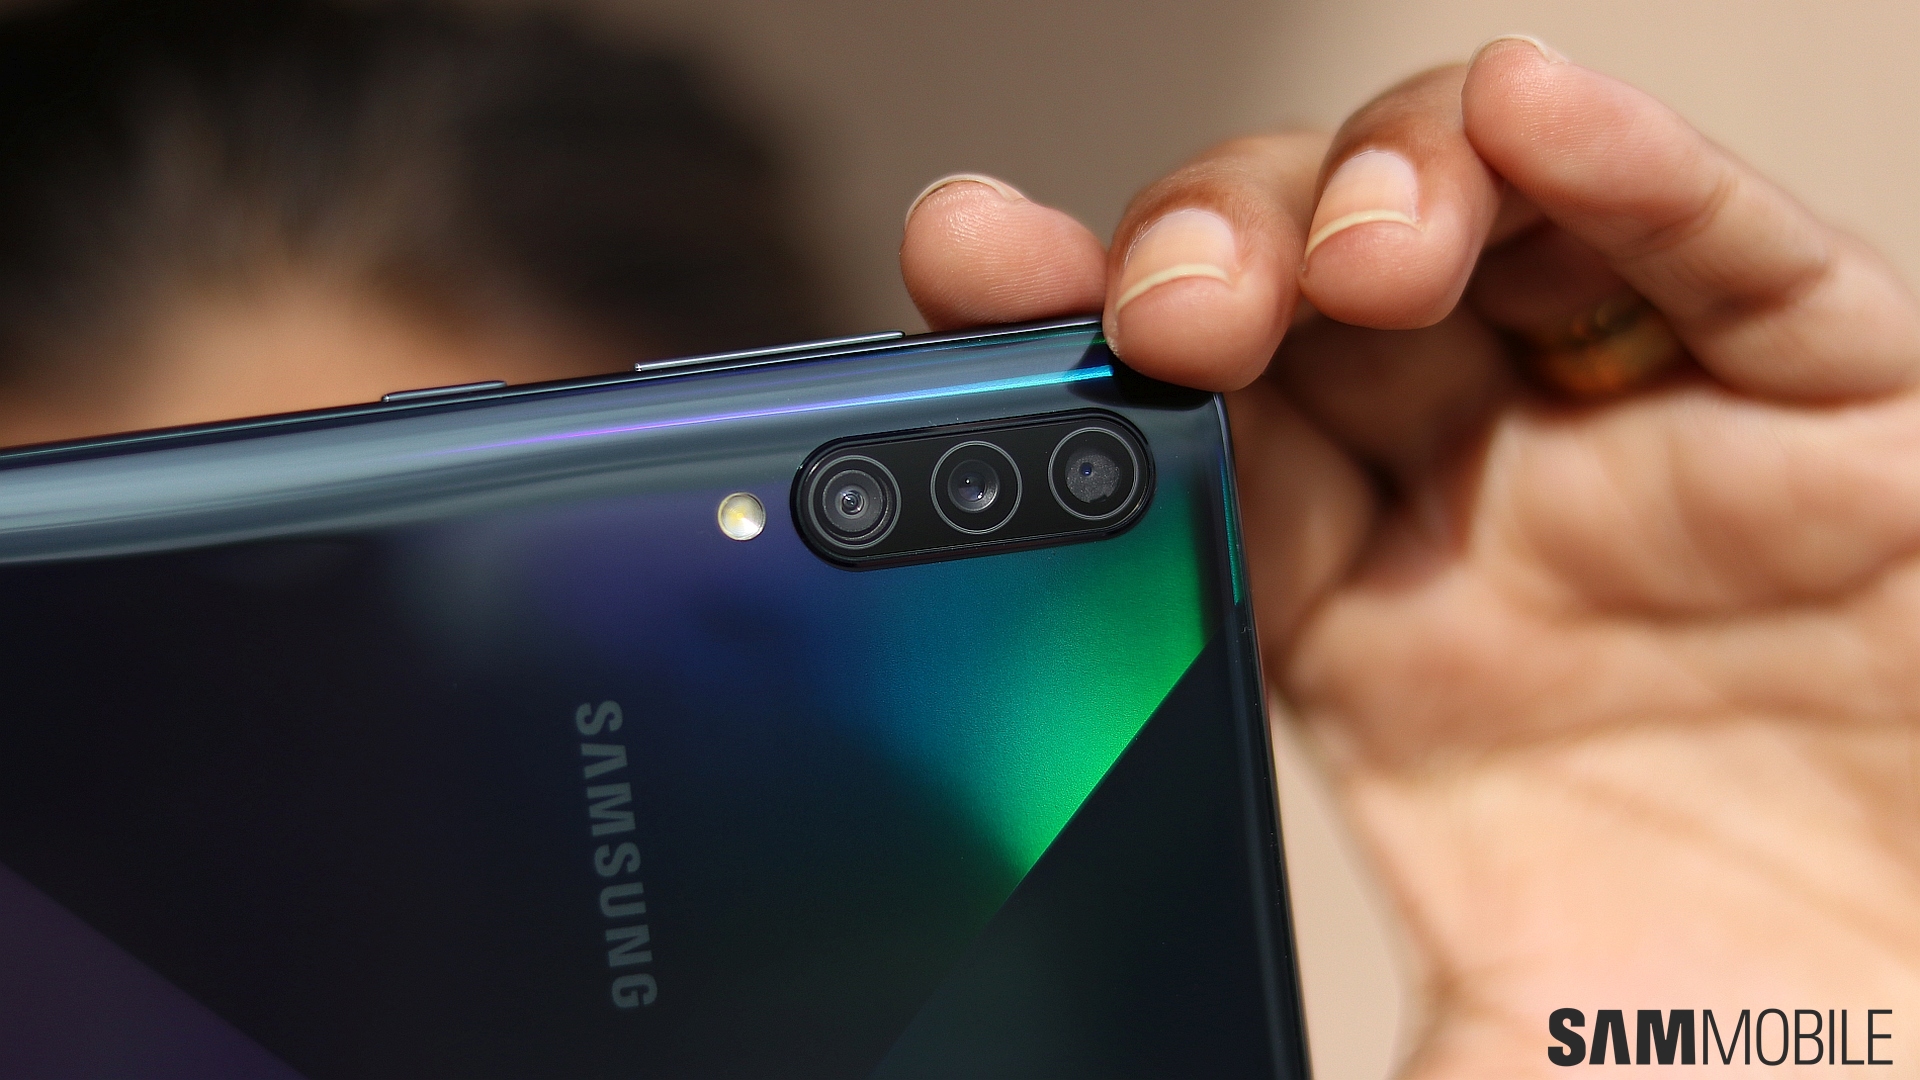 Samsung Galaxy A50 gets the August 2021 security update - SamMobile